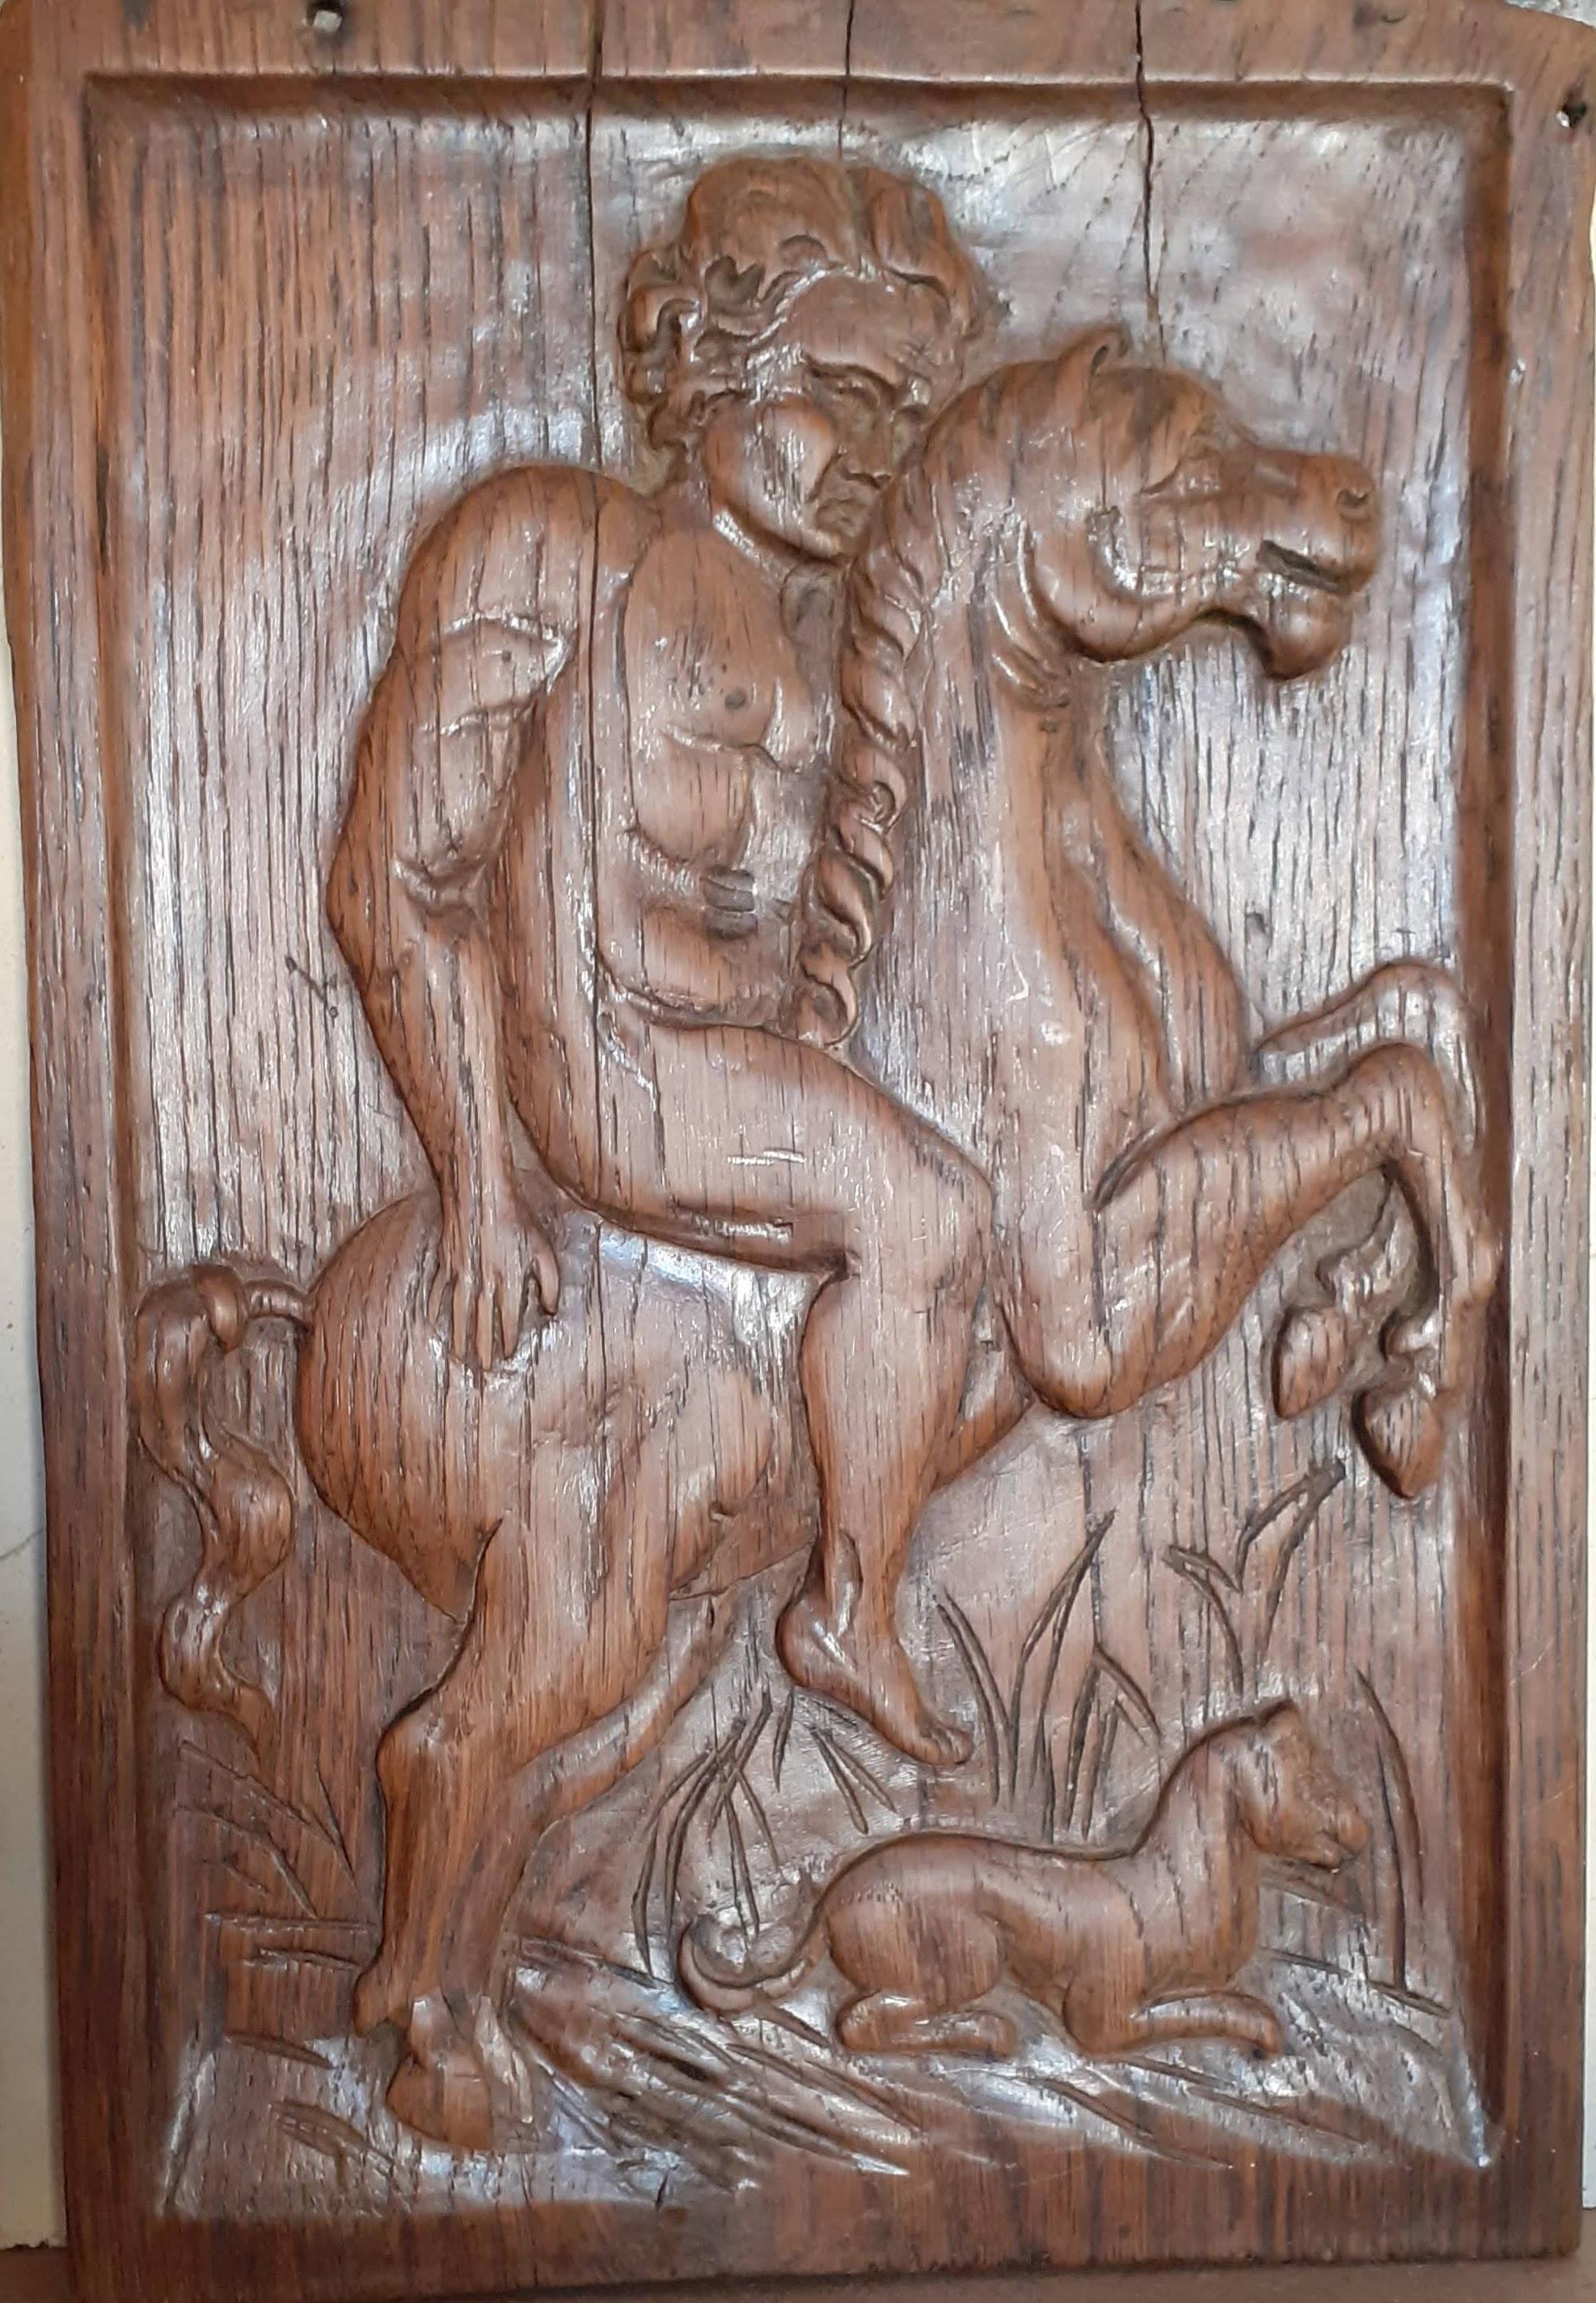 Mythological scene: naked male rider and his dog French relief sculpture carving - Sculpture by Unknown